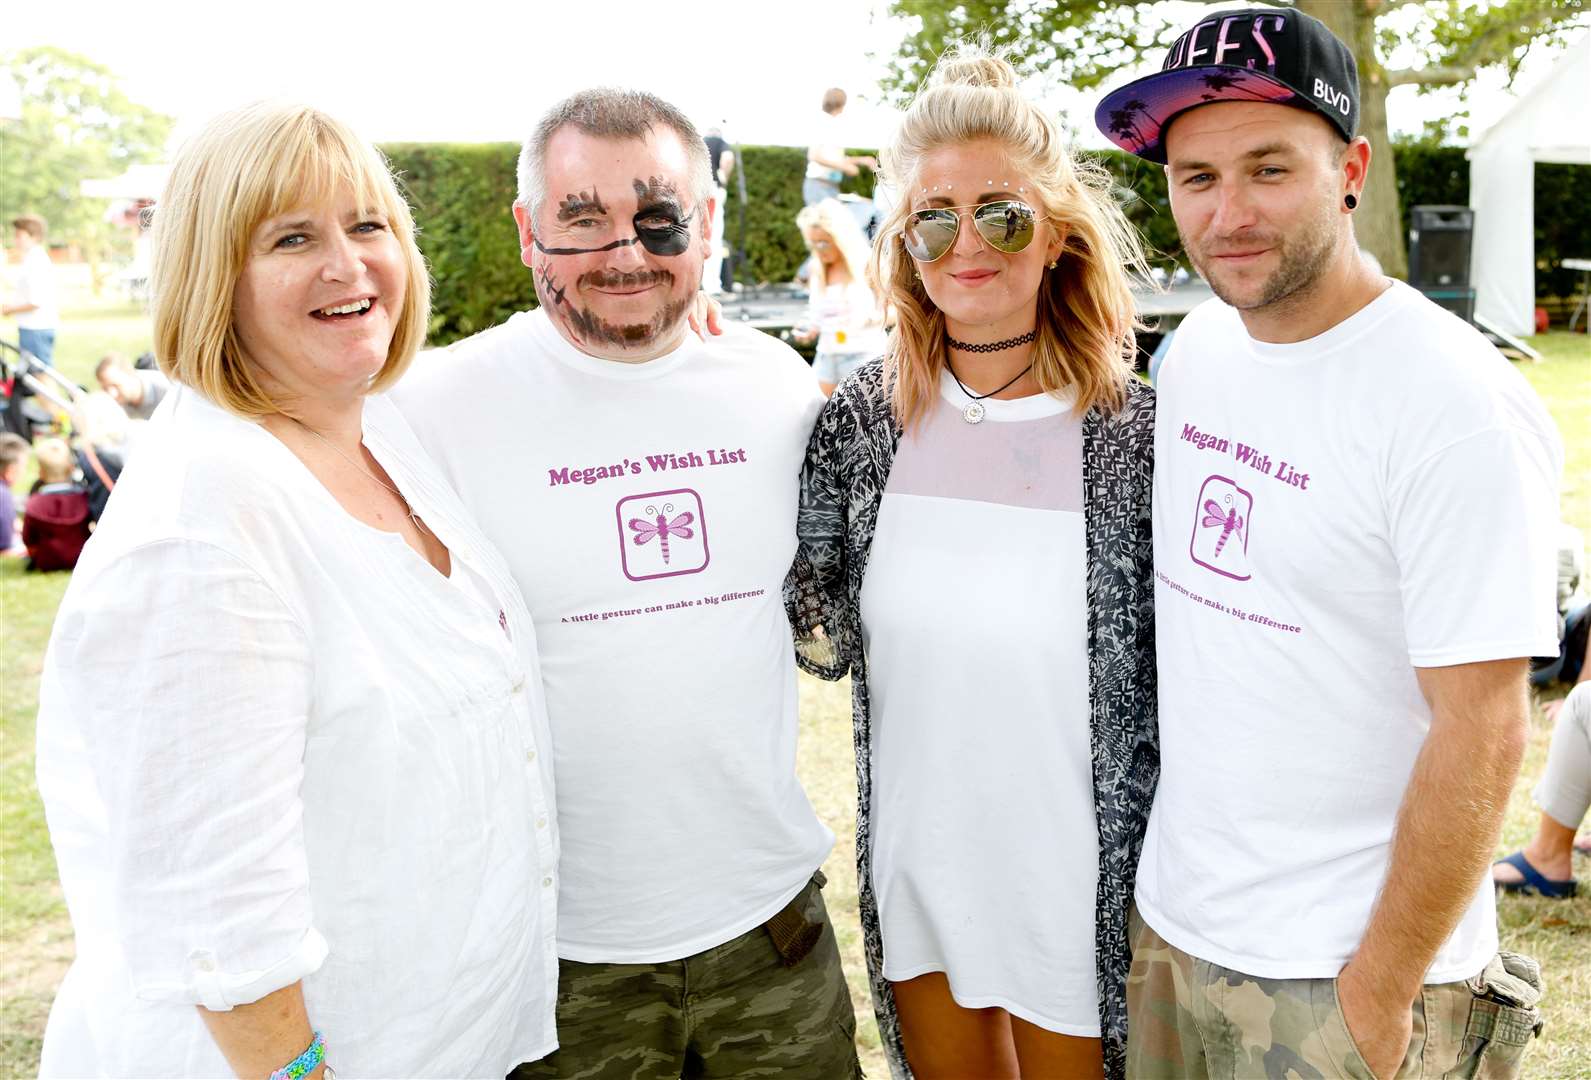 Parents Lucy and Chris and Megan's sister Jess with DJ Chris Nottingham at a previous festival